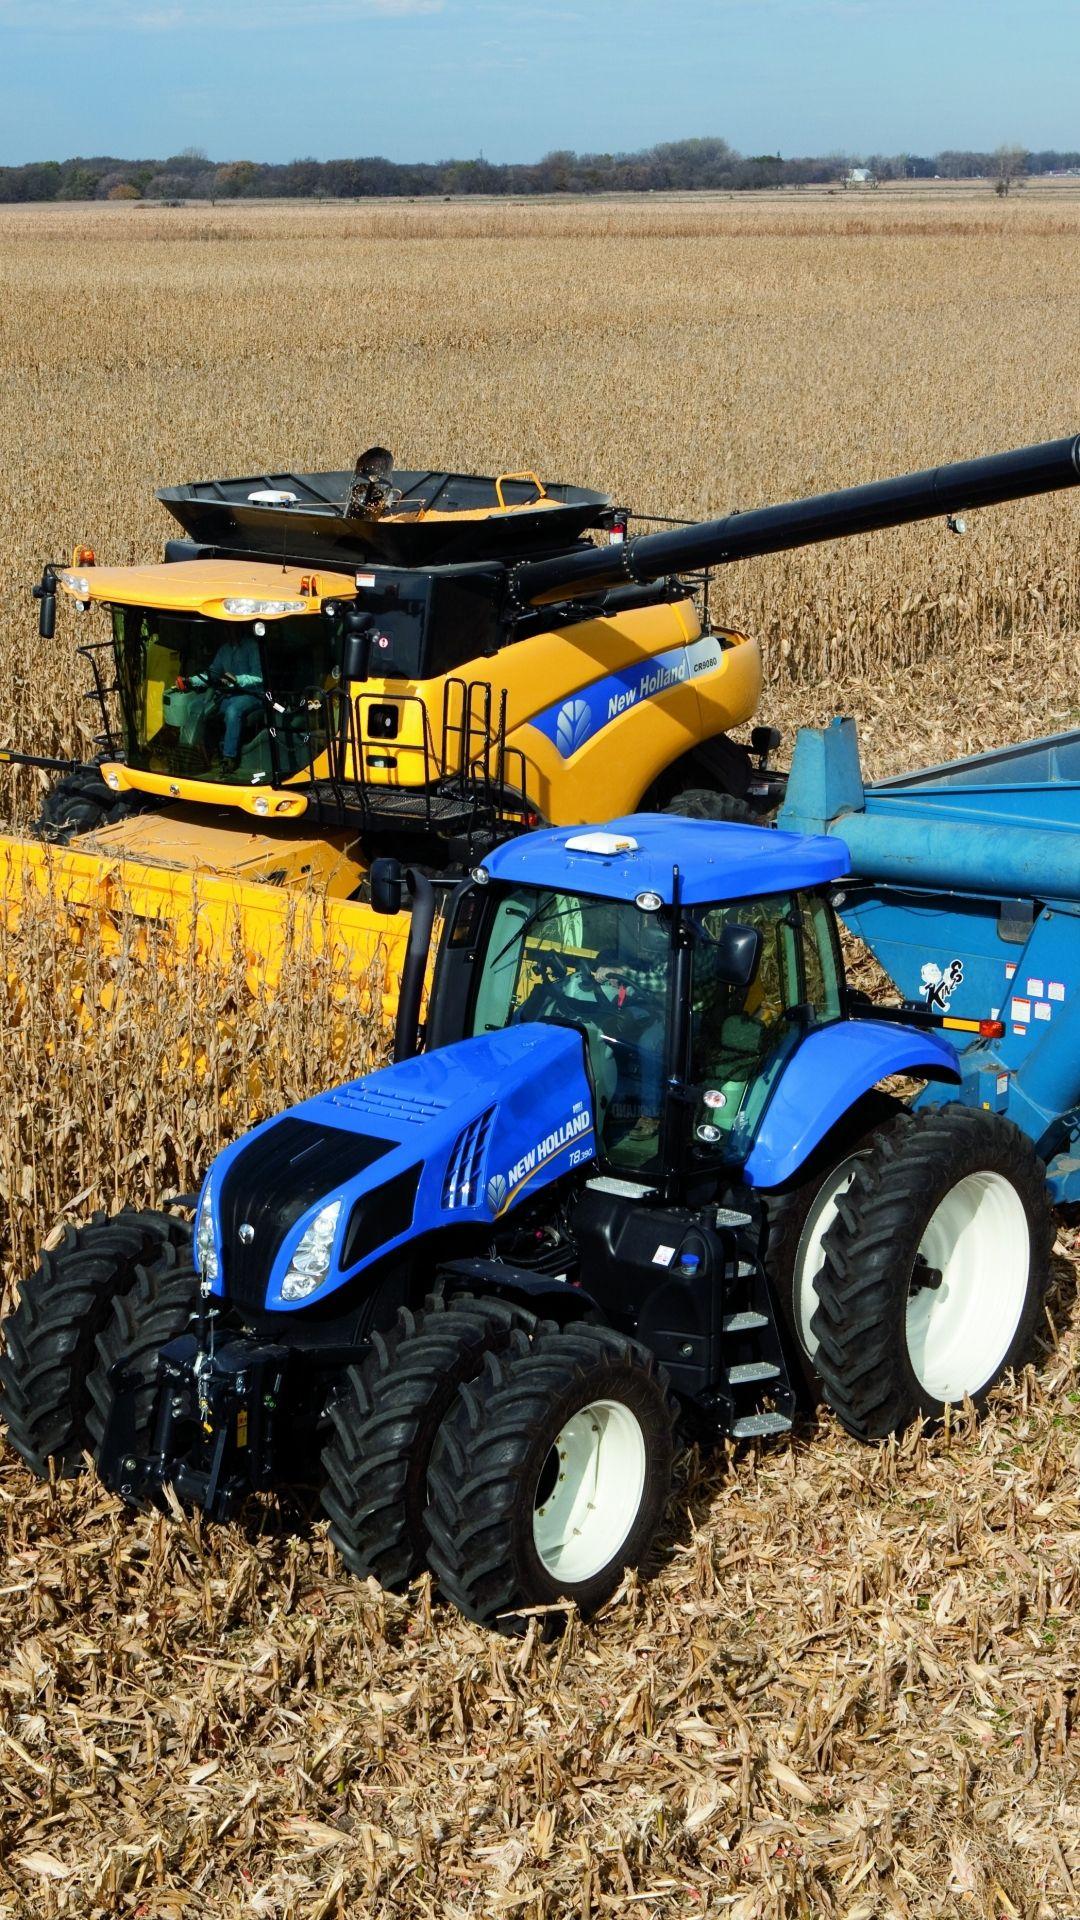 IPhone 6 Plus New Holland. New Holland Agriculture, New Holland Tractor, New Holland